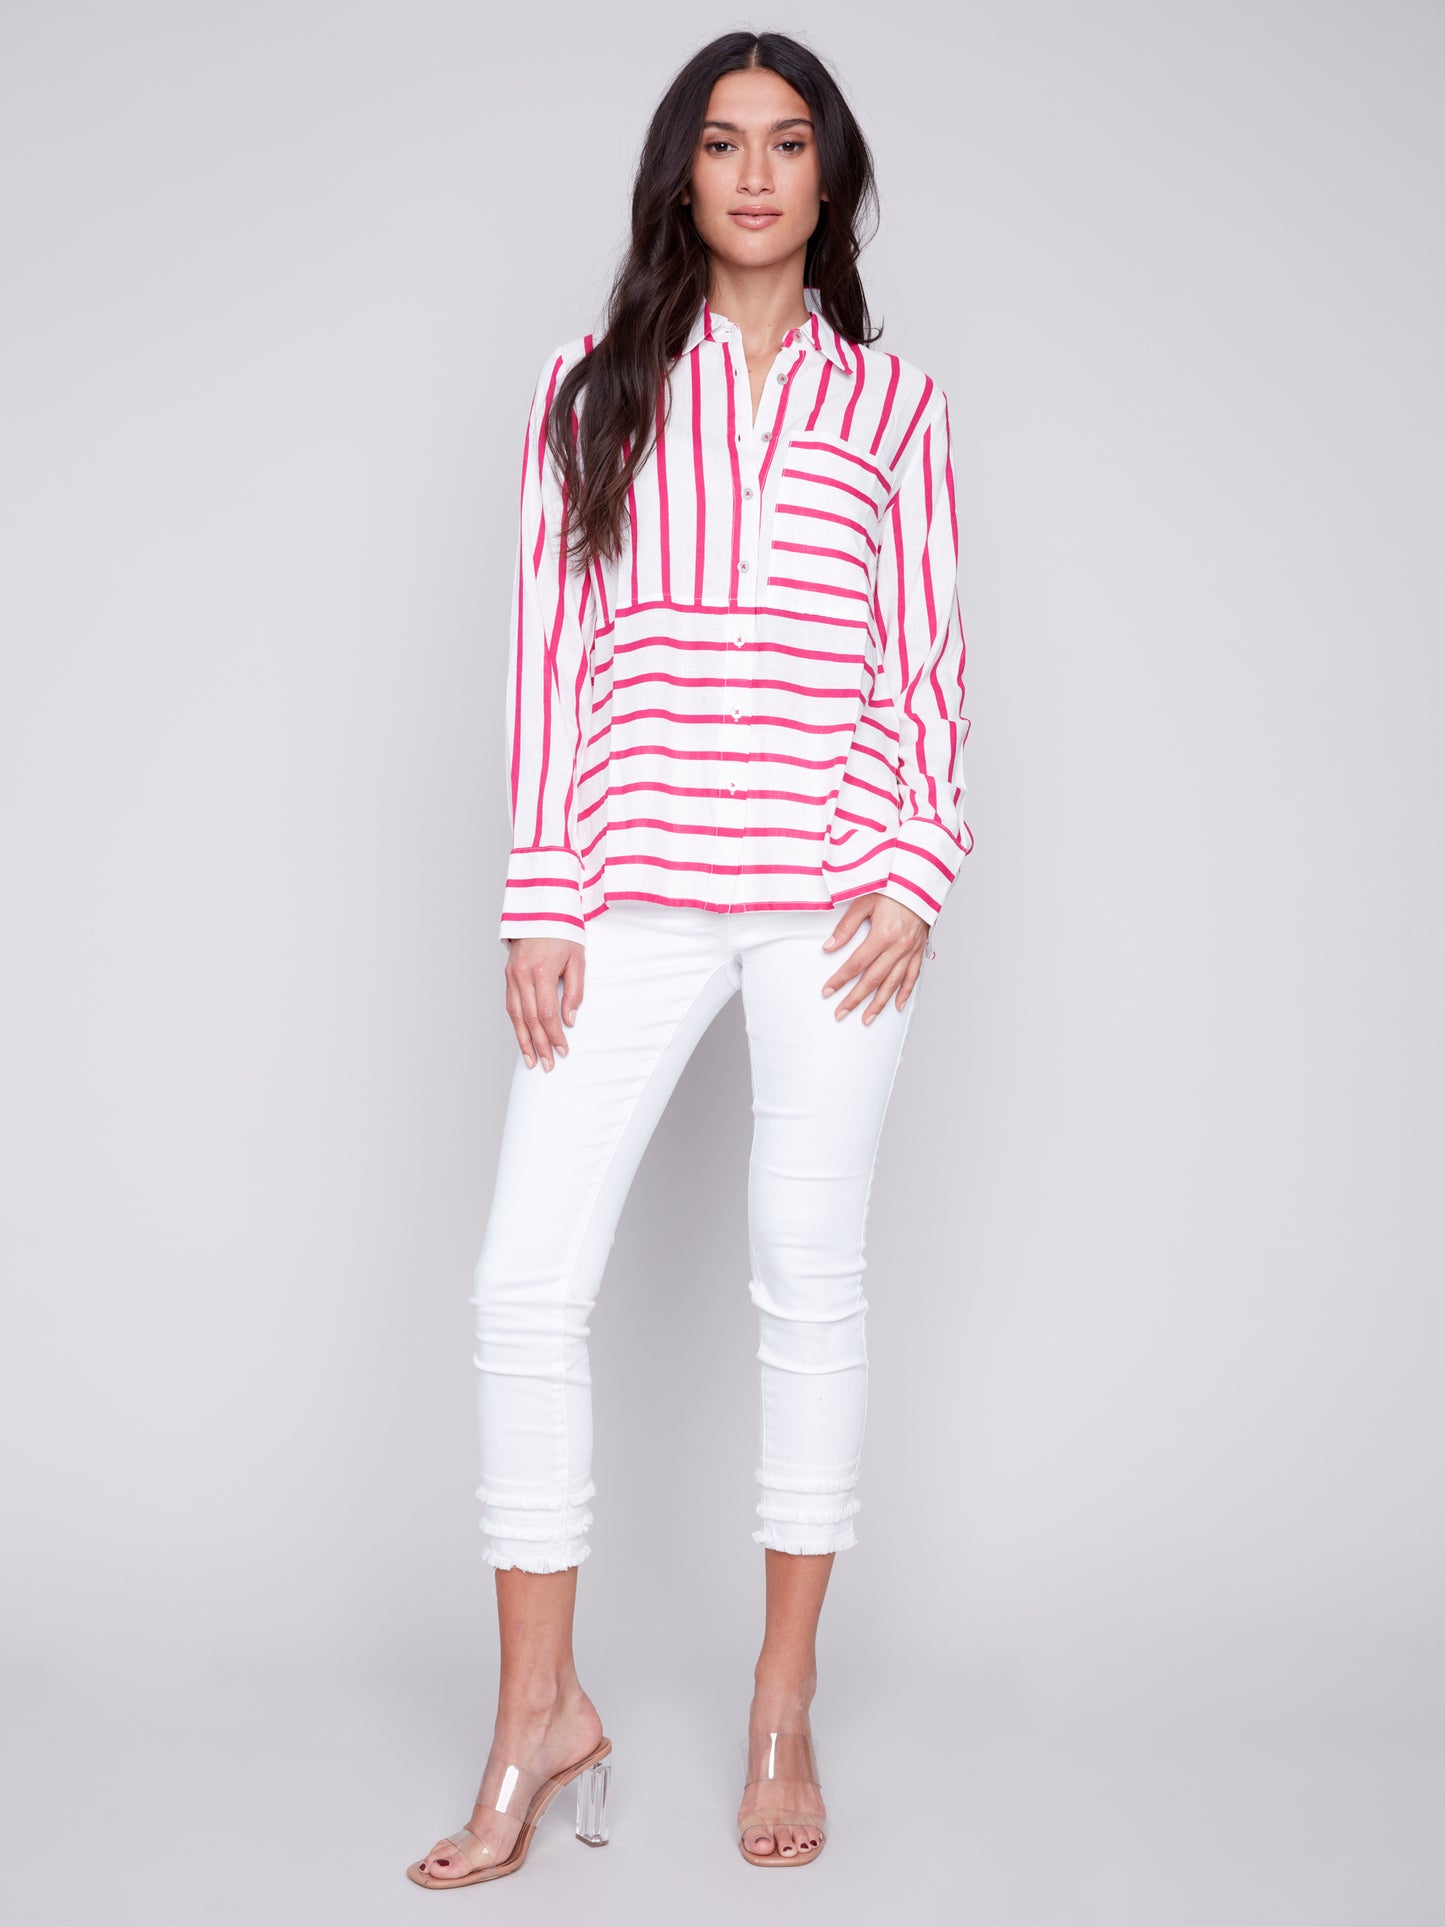 Woman wearing a Charlie B Lined Blend Striped 3/4 Button Top with white pants posing against a gray background.